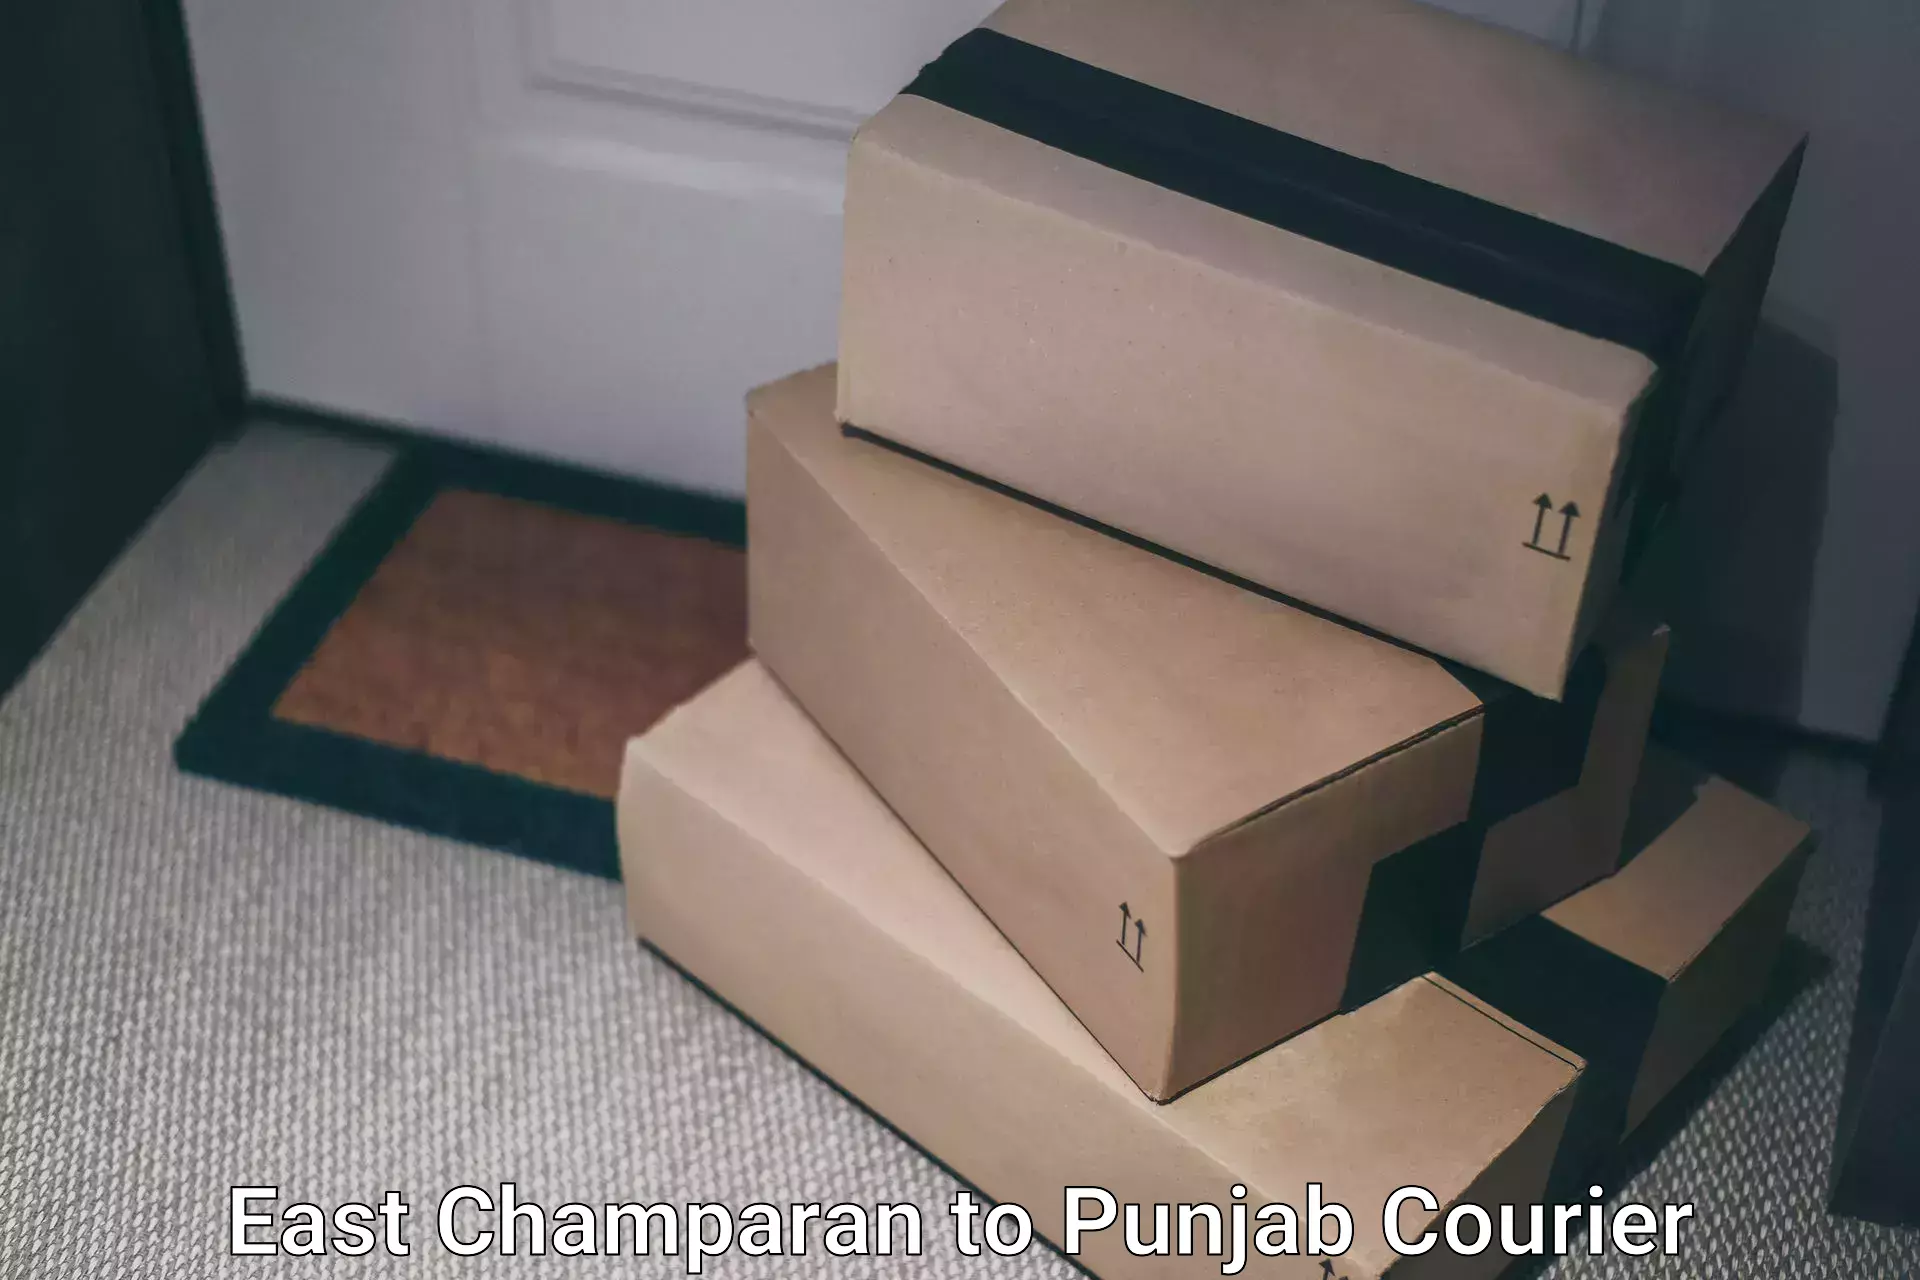 User-friendly courier app East Champaran to Goindwal Sahib